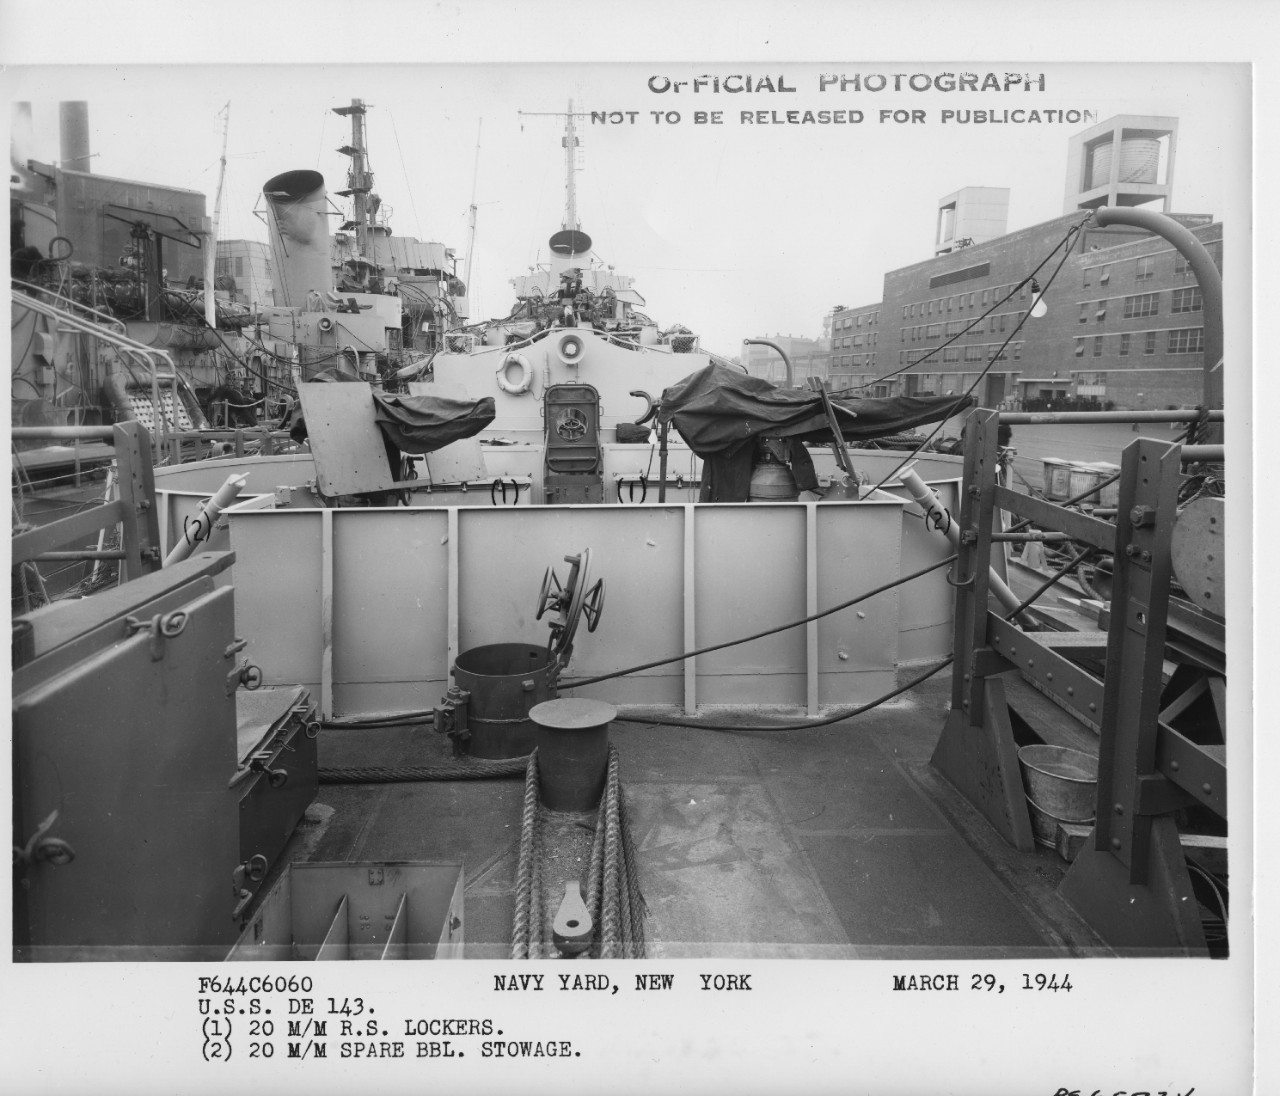 Looking forward from Fiske’s fantail, 29 March 1944, with Durant alongside (L), the latter festooned with lines and cables that typify a shipyard overhaul. Note Fiske’s after 20-millimeter mounts; number (1) refers to ready service boxes for 20-millimeter ammunition, while (2) refers to spare Oerlikon barrel stowage. Also note 3-inch/50 caliber gun just forward. (U.S. Navy Bureau of Ships Photograph BS 65724, National Archives and Records Administration, Still Pictures Division, College Park, Md.)